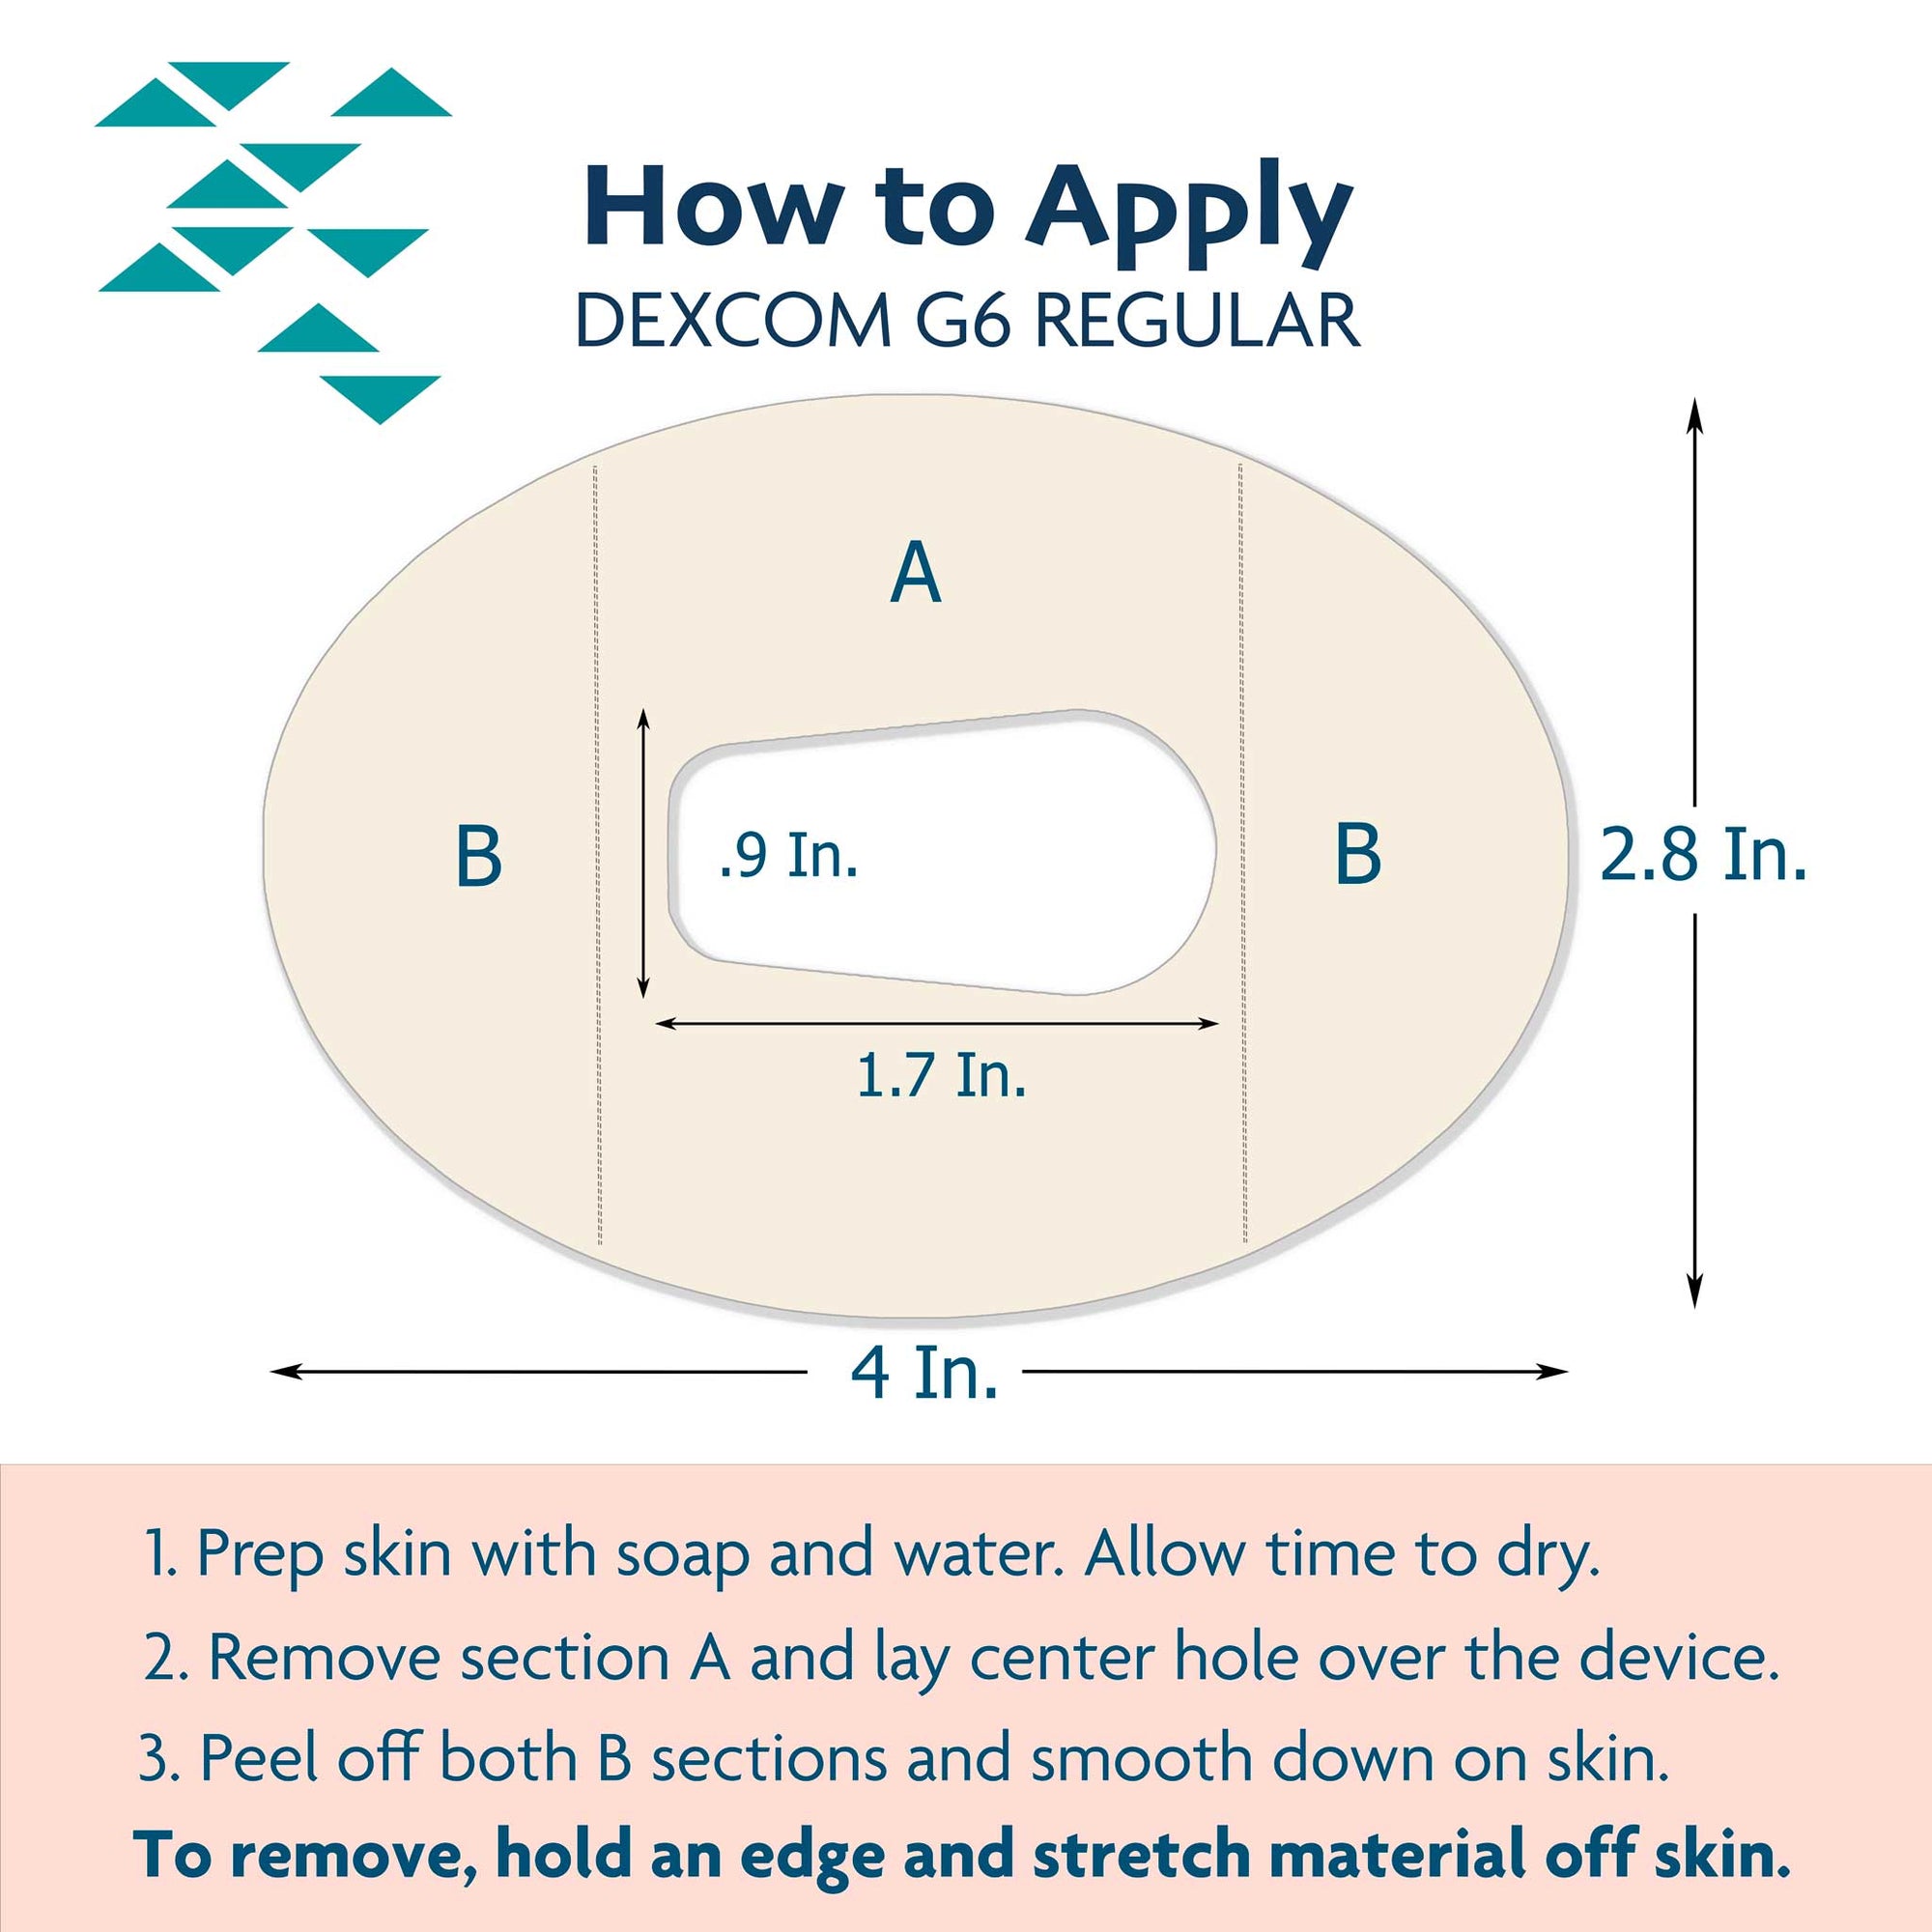 ExpressionMed Tutorial to properly apply CGM cover to Dexcom G6 device